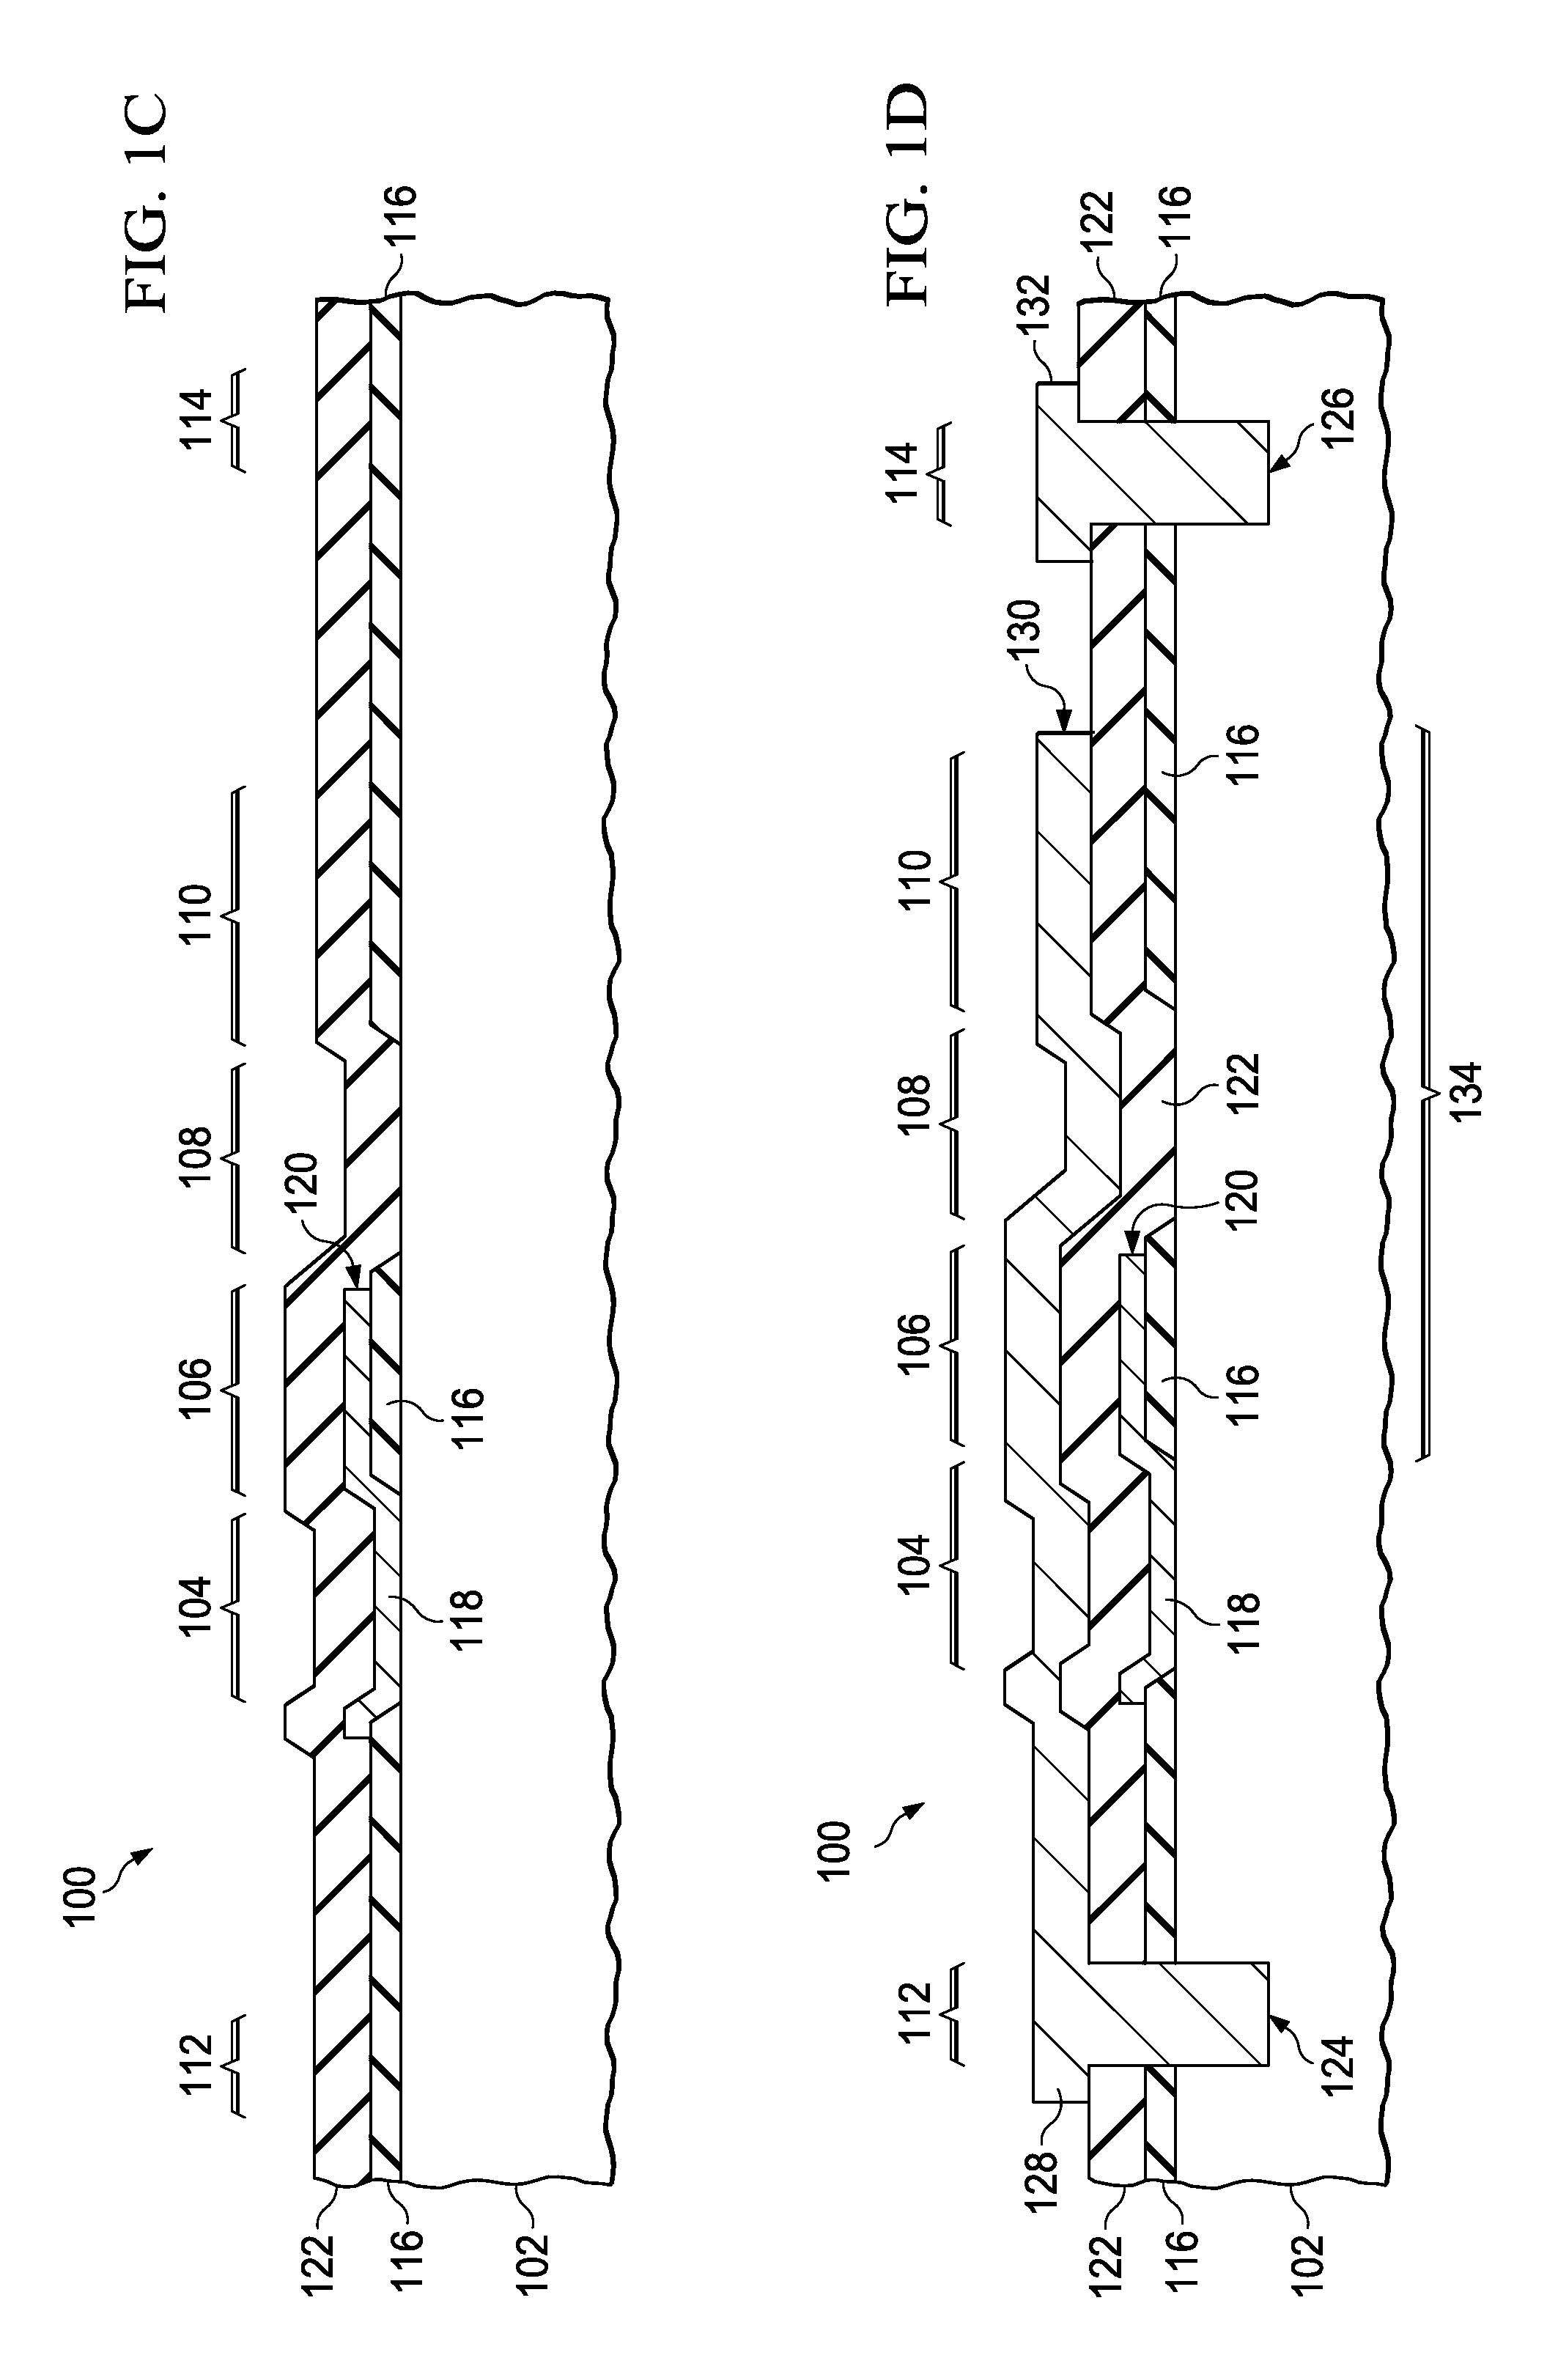 Stepped dielectric for field plate formation